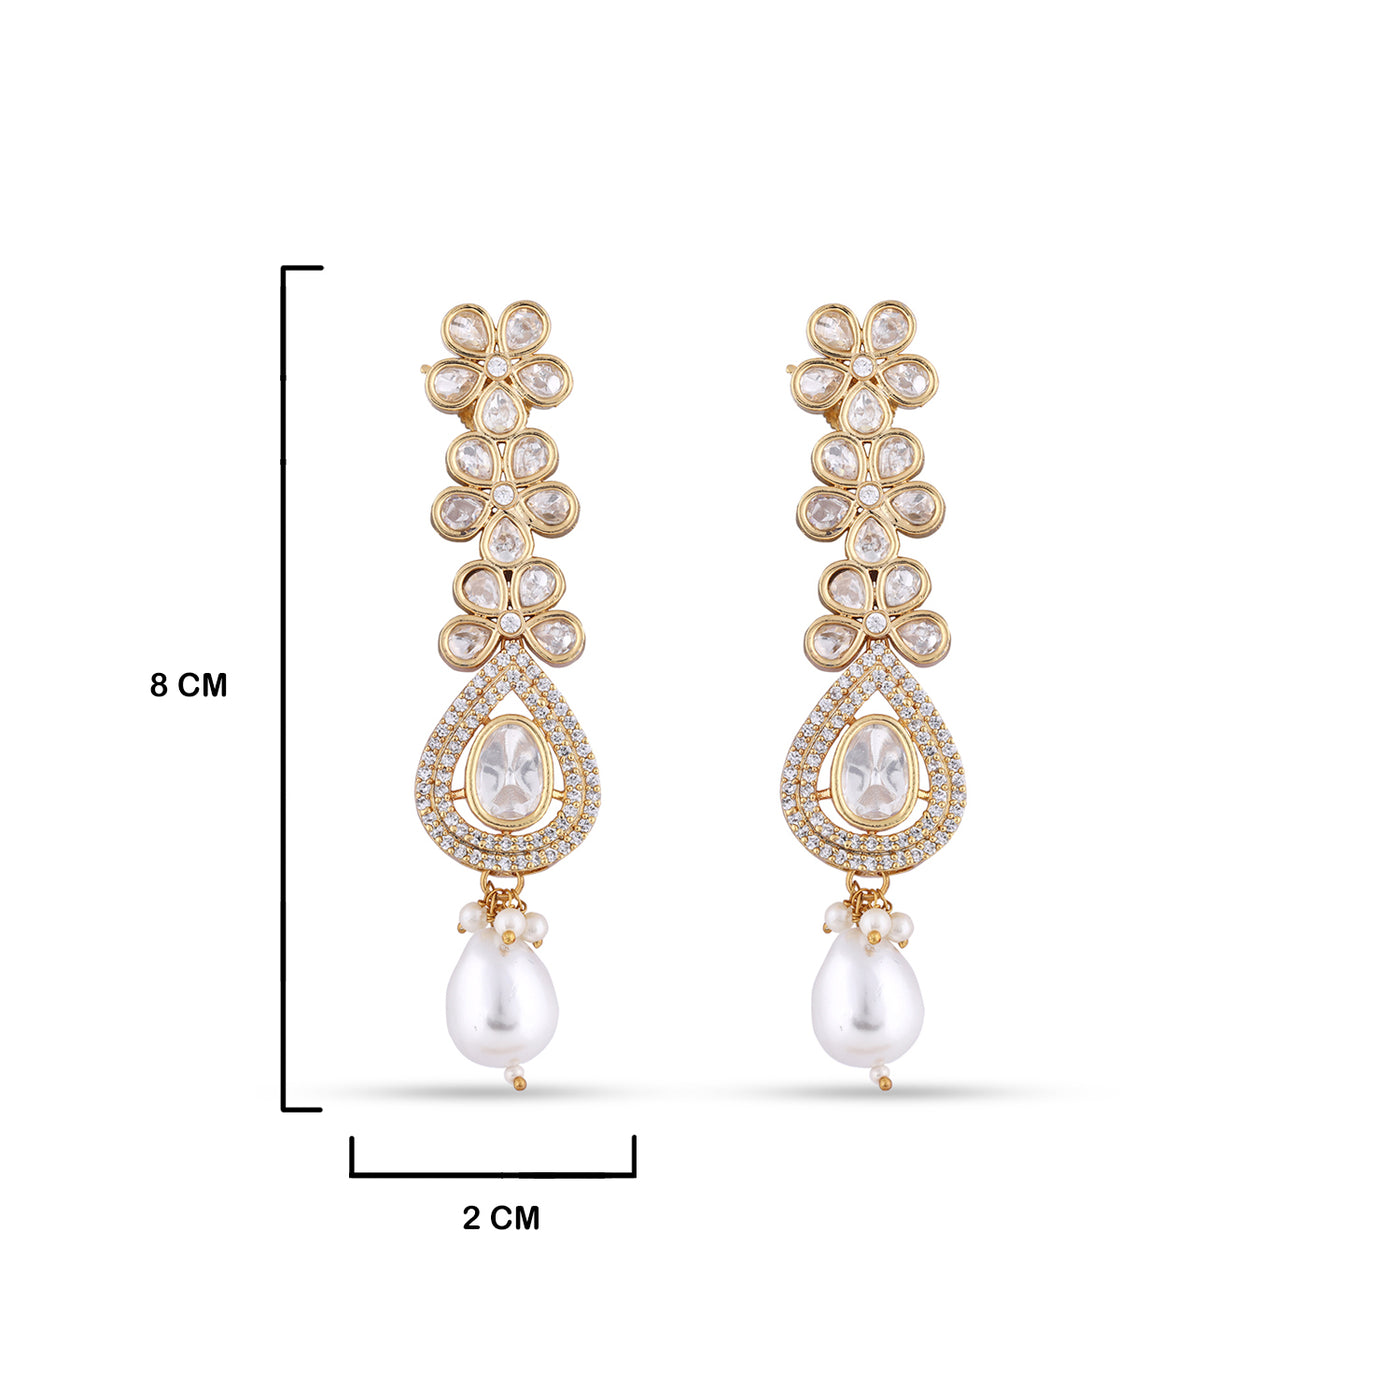  Polki and White Bead Earrings with measurements in cm. 8cm by 2cm.